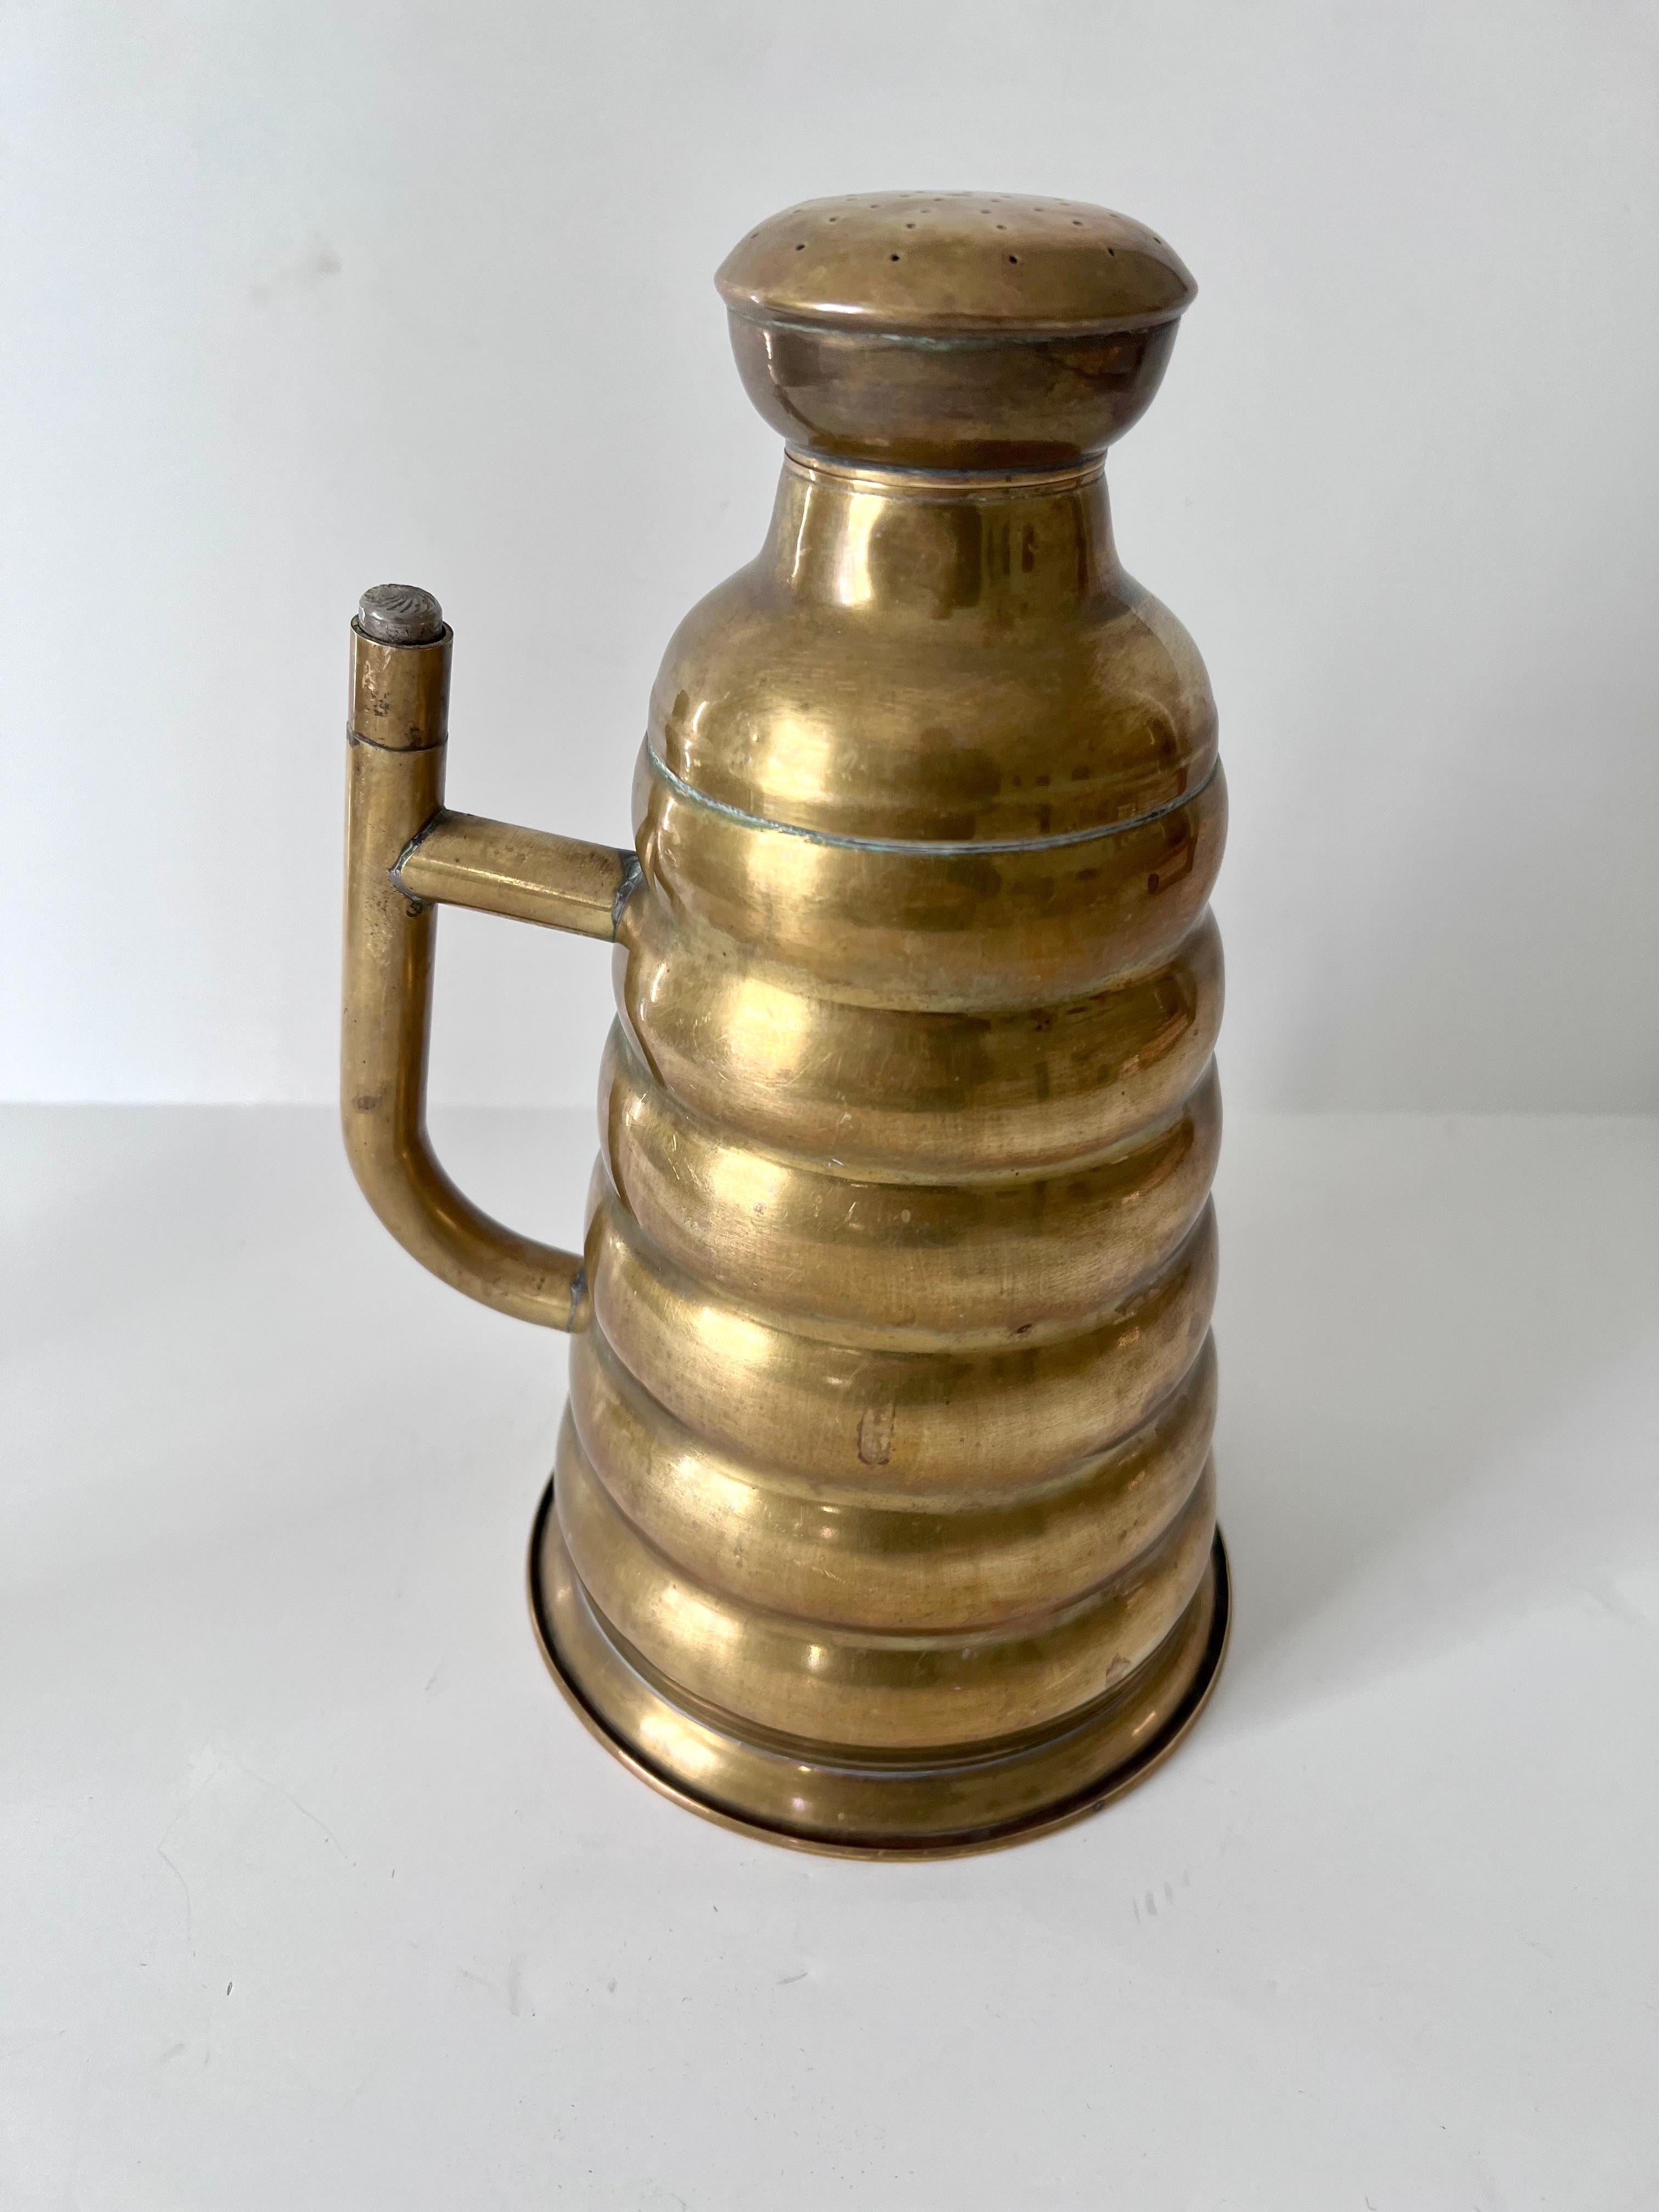 A very unique piece acquired in Paris France. The brass ribbed can with a handle is actually a can to sprinkle clothing when ironing, however it makes a great garden watering can, or also works beautifully as a stand-alone decorative piece.

A